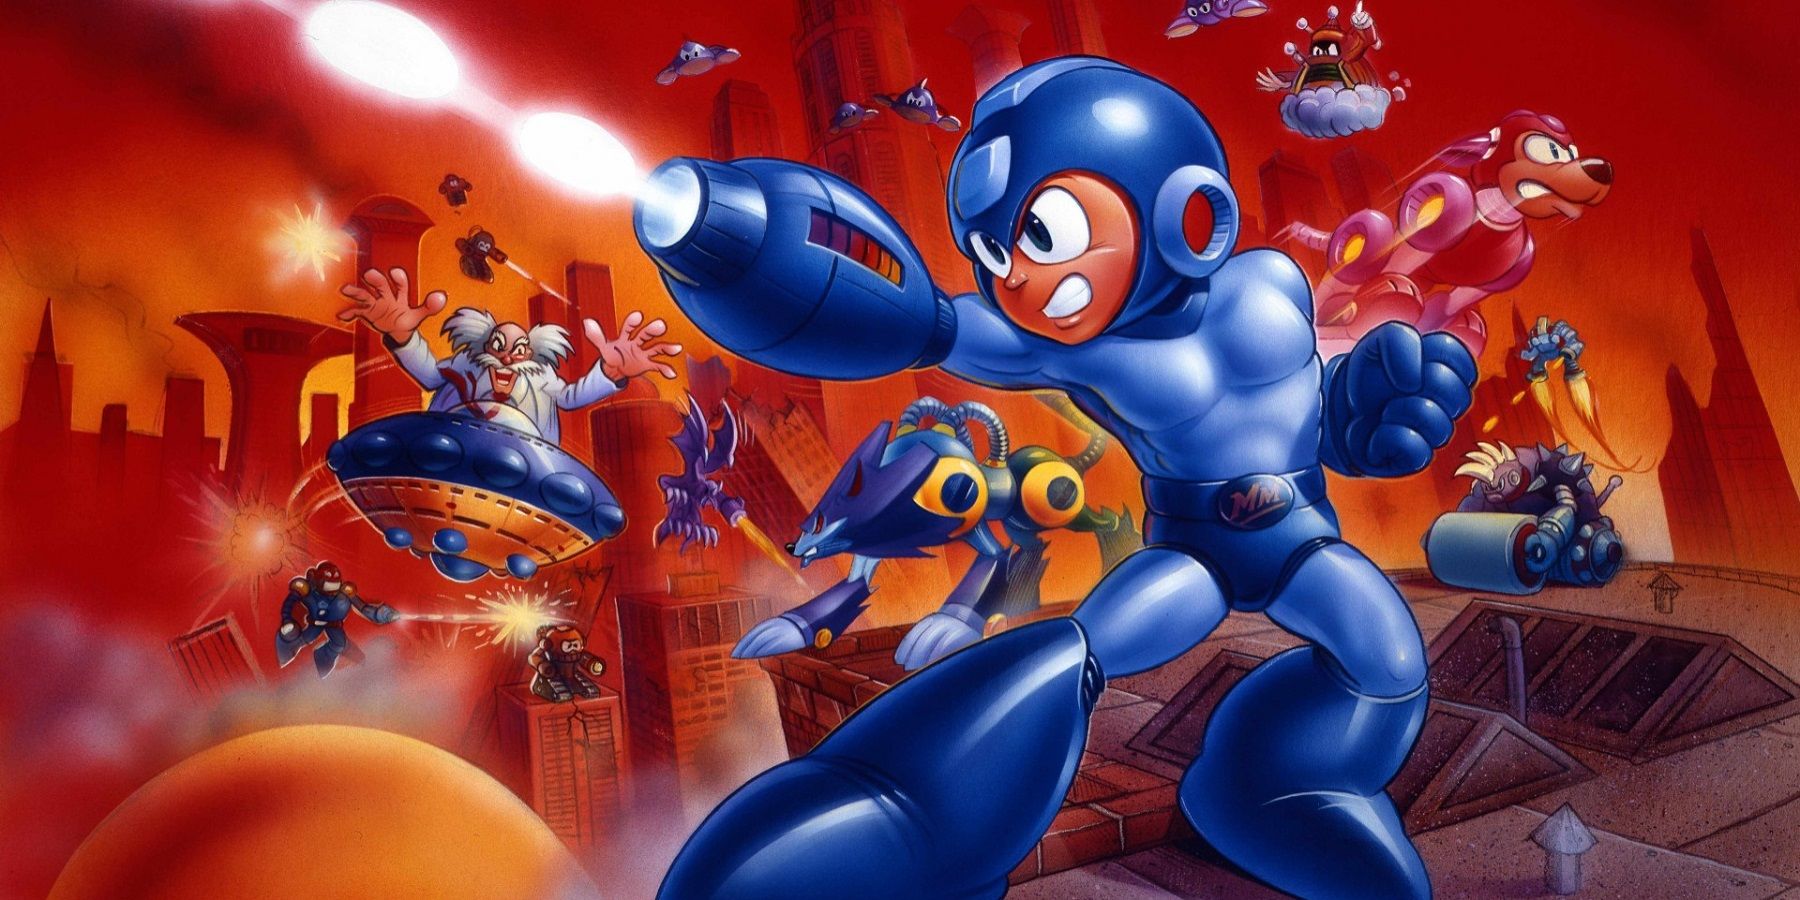 12 Things You Need to Know About Mega Man